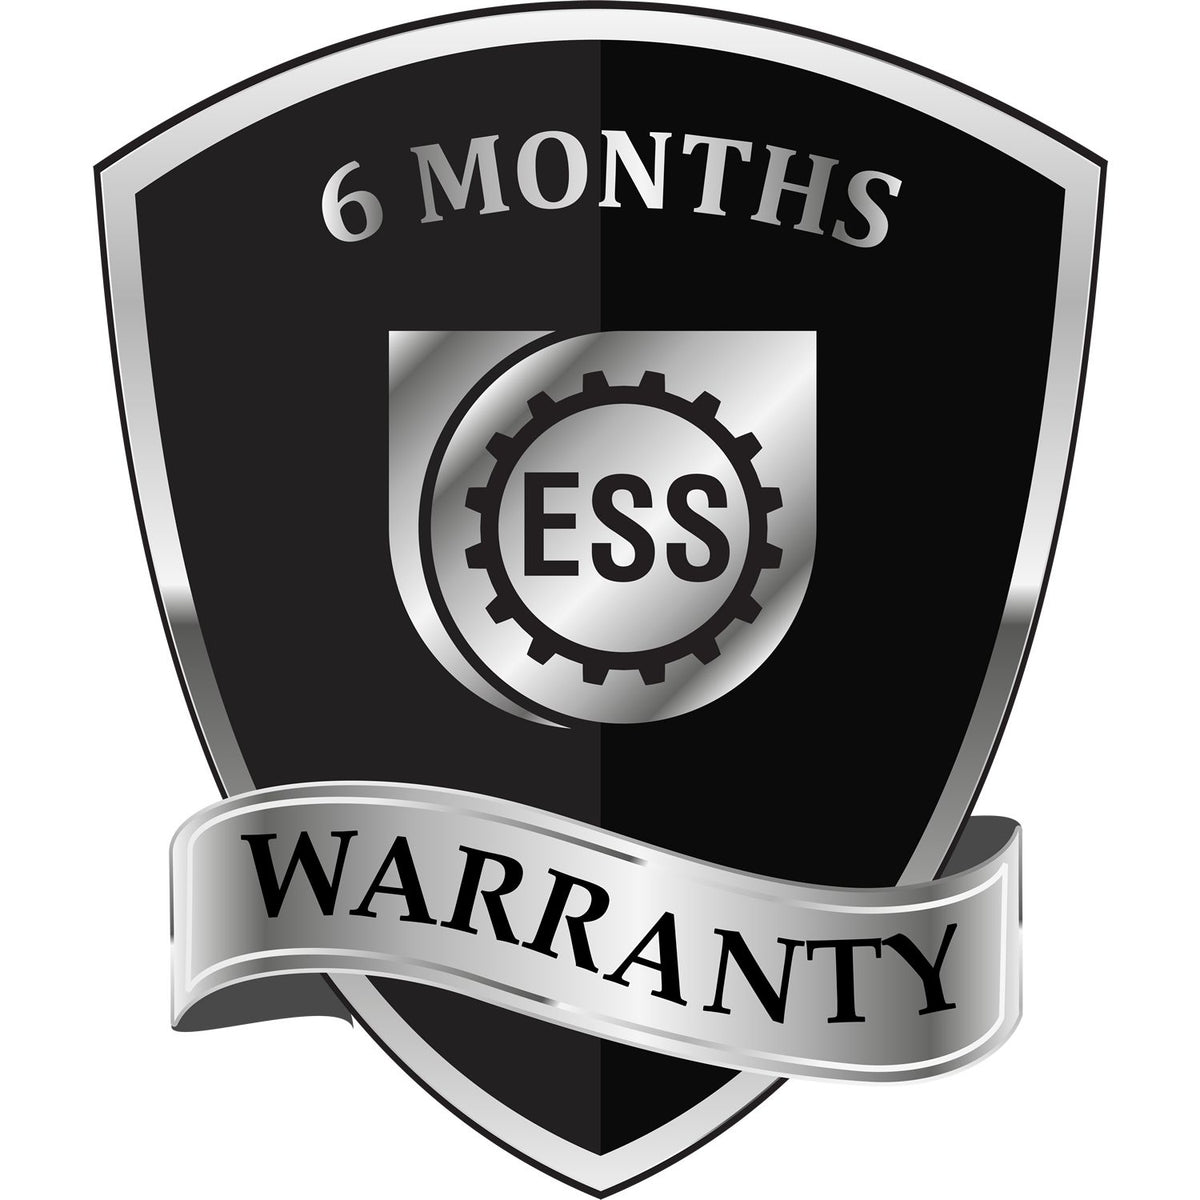 A badge or emblem showing a warranty icon for the PSI New Jersey Notary Stamp